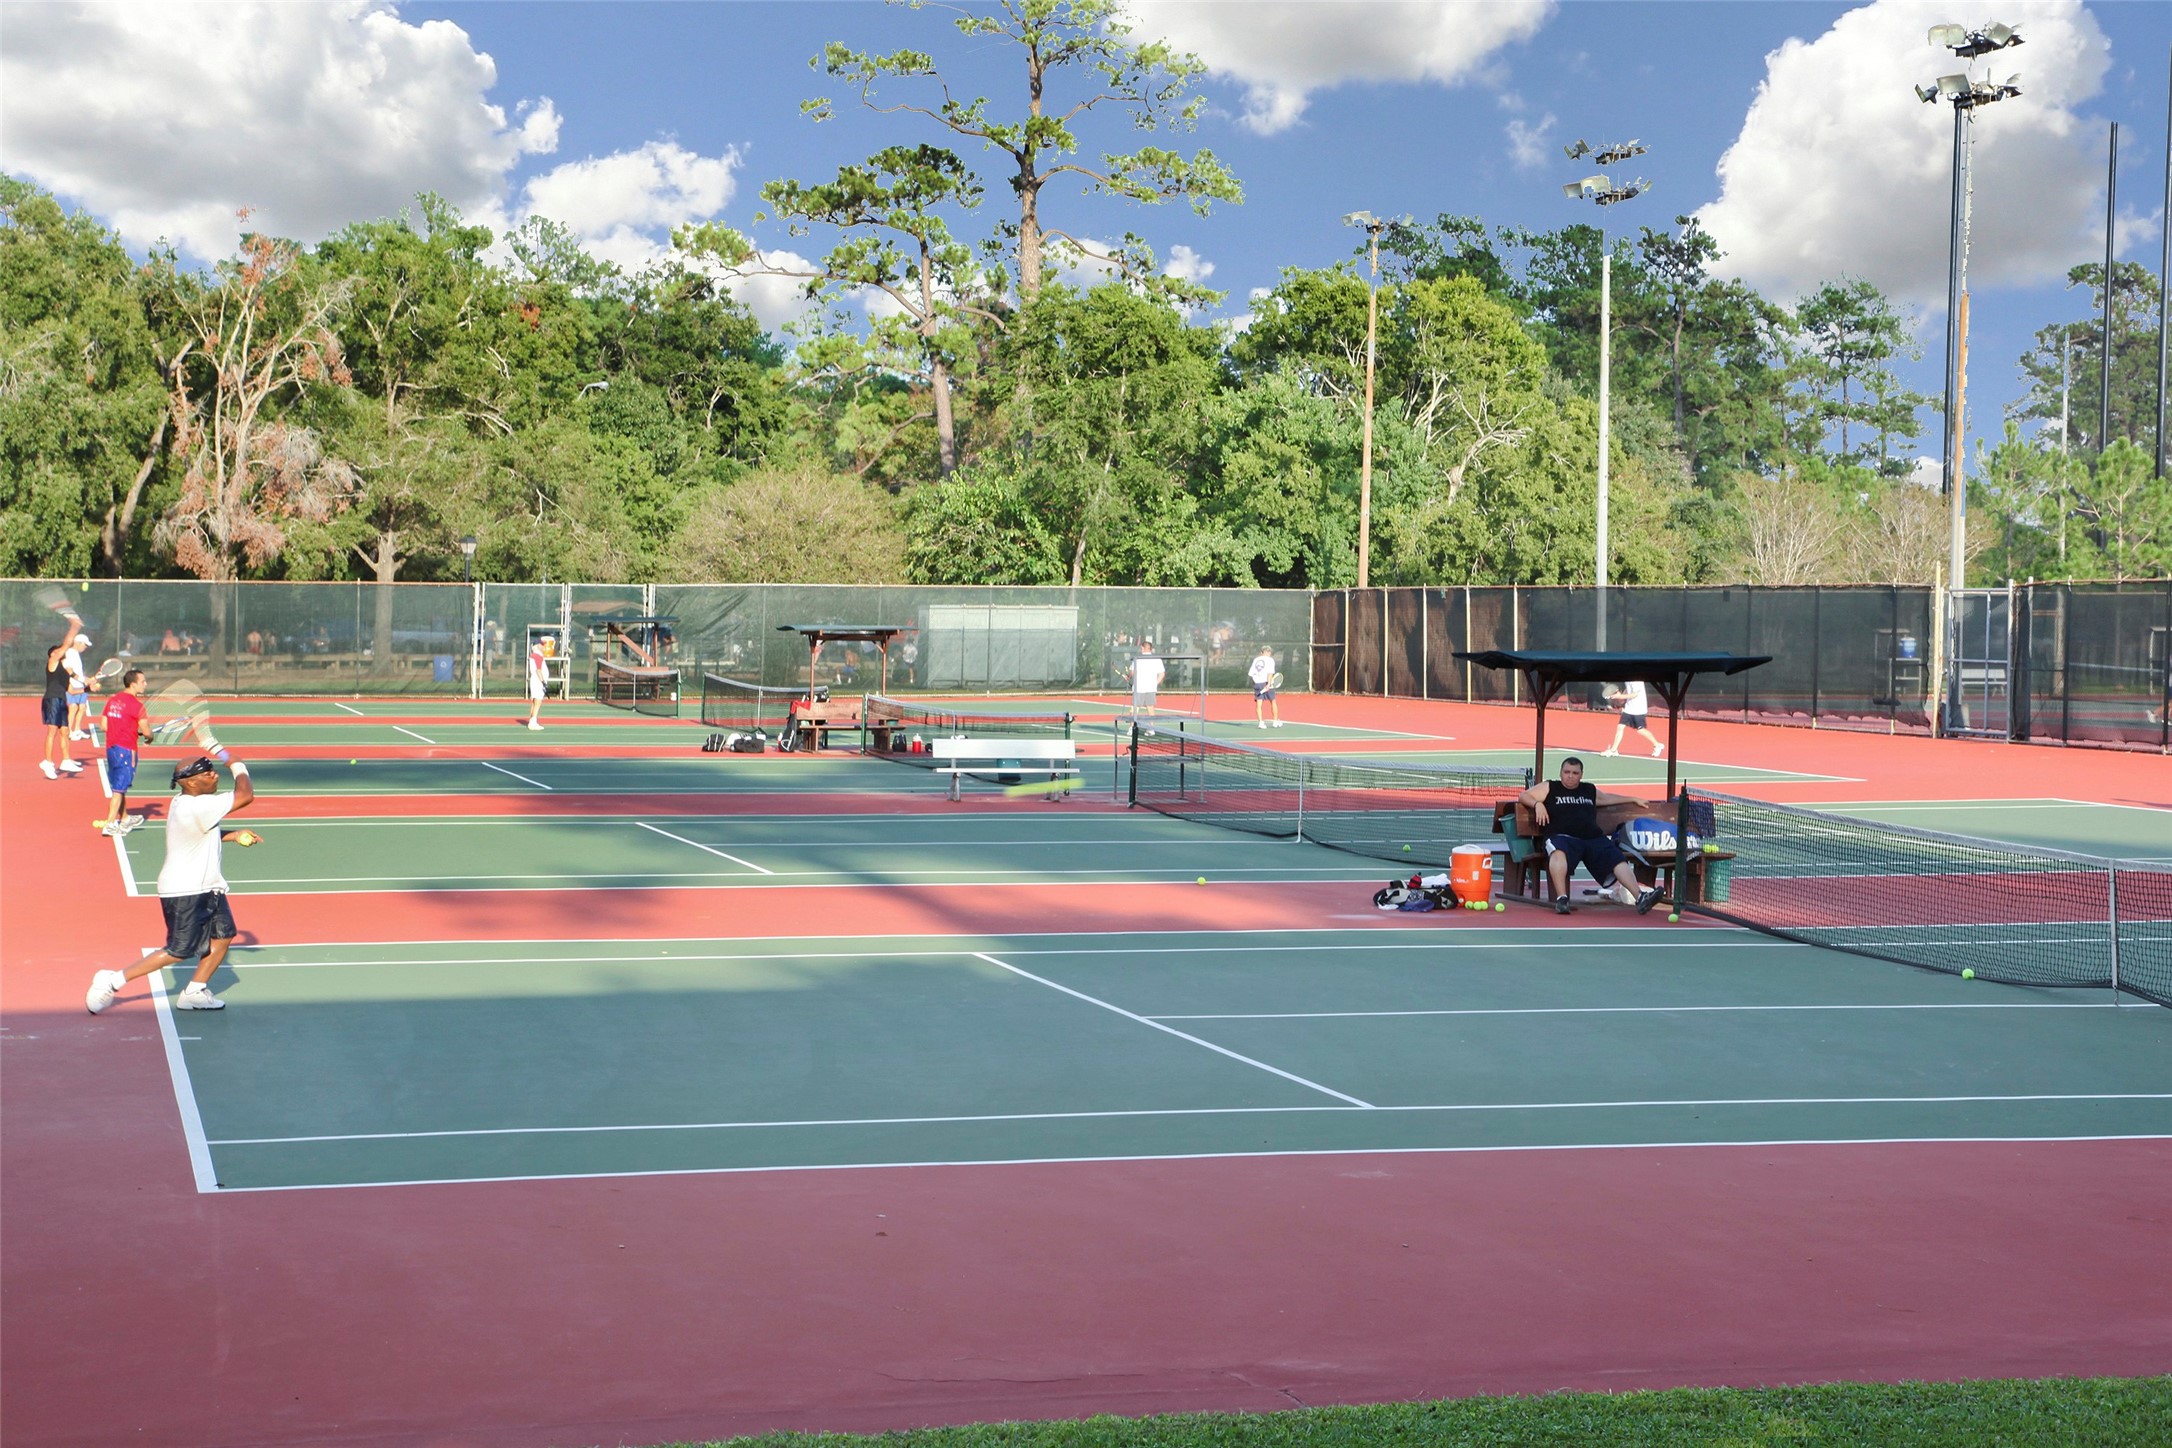 The park also includes facilities for tennis, softball, track, croquet, volleyball, in-line skating, and....